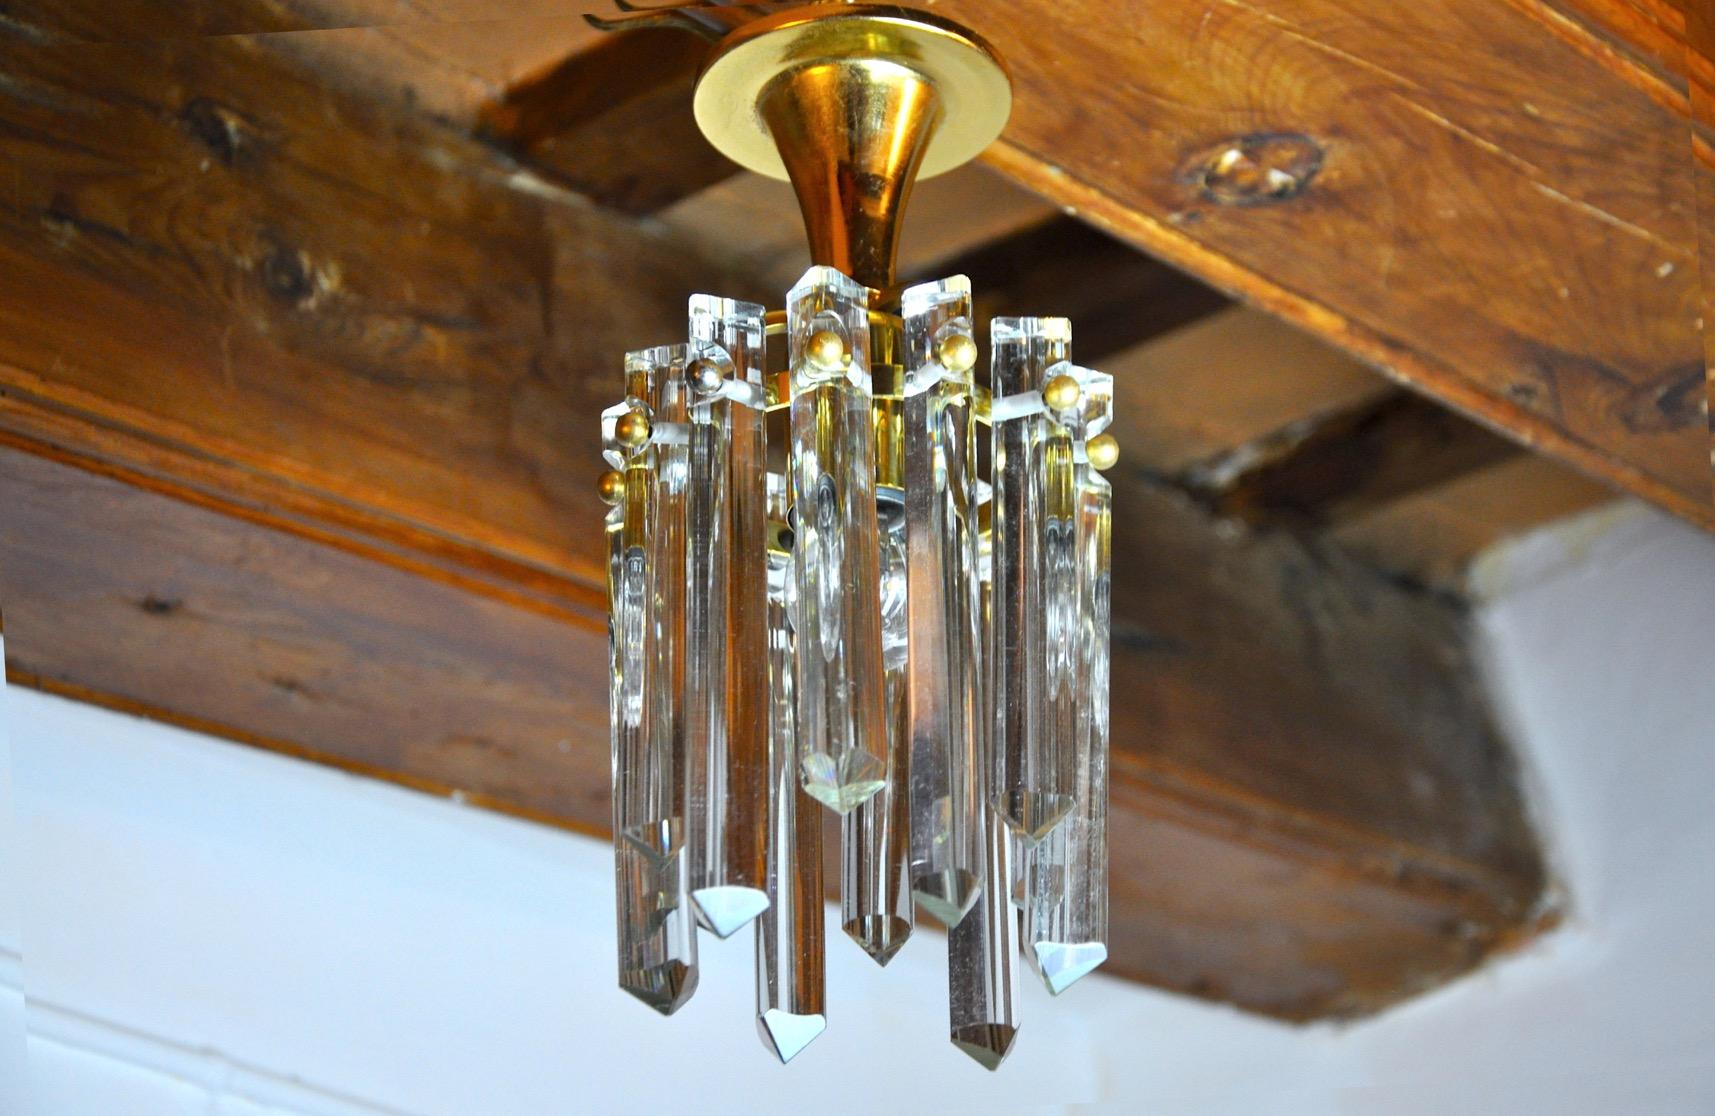 Superb small ceiling lamp or chandelier in kinkeldey glass, designed and produced in Germany in the 1970s. Unique object that will illuminate marvelously and bring a real design touch to your interior. Electricity checked, mark of time in accordance